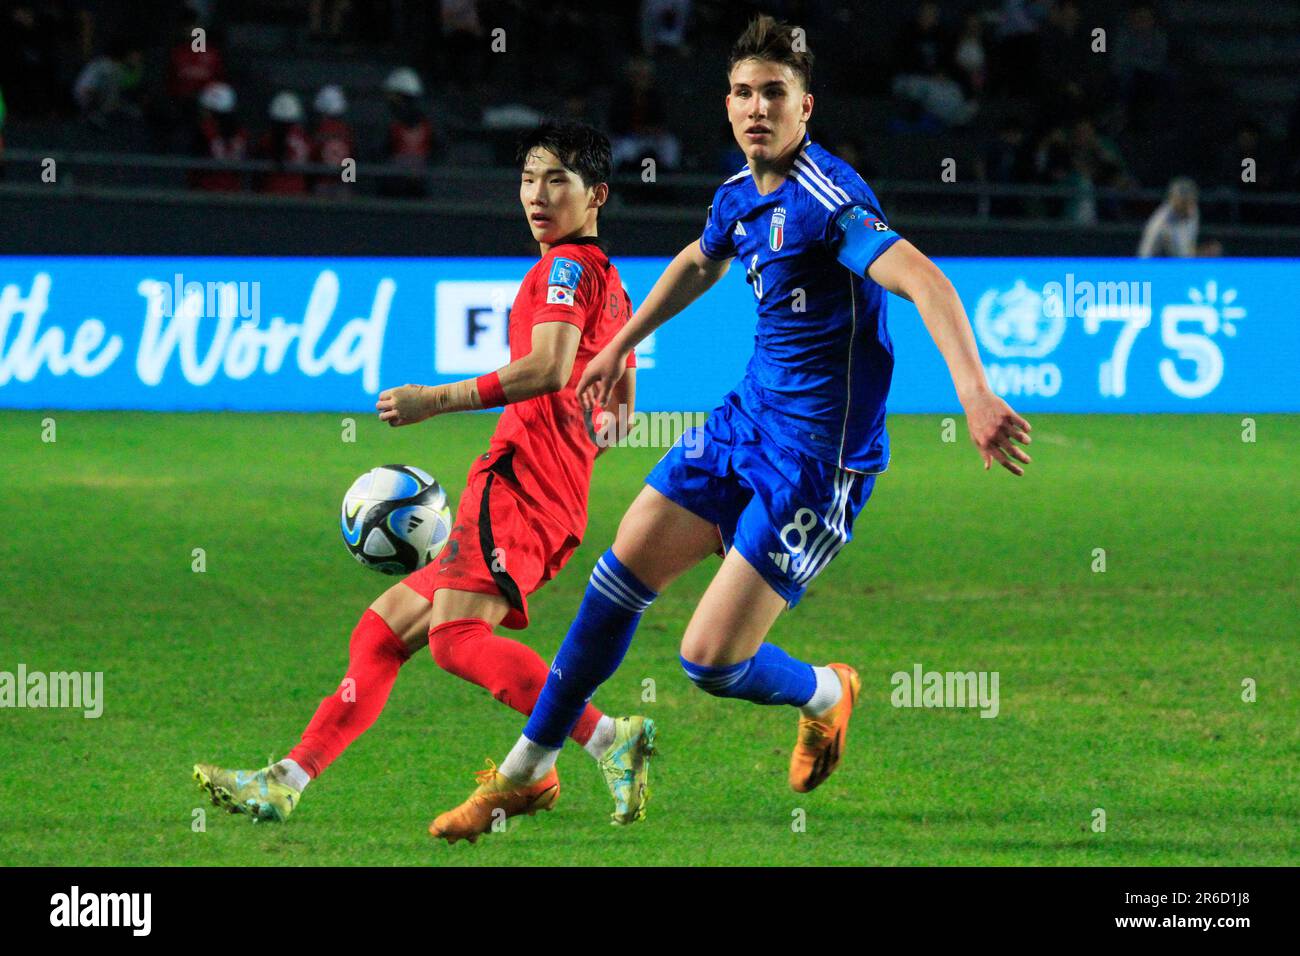 La Plata, Argentina. 08th June, 2023. Cesare Casadei of Italy battles for possession with Seung-Won Lee of South Korea, during the match between Italy and South Korea for the semifinal FIFA U-20 World Cup Argentina 2023, at Ciudad de La Plata Stadium, in La Plata, Argentina on June 08. Photo: Pool Pelaez Burga/DiaEsportivo/DiaEsportivo/Alamy Live News Credit: DiaEsportivo/Alamy Live News Stock Photo